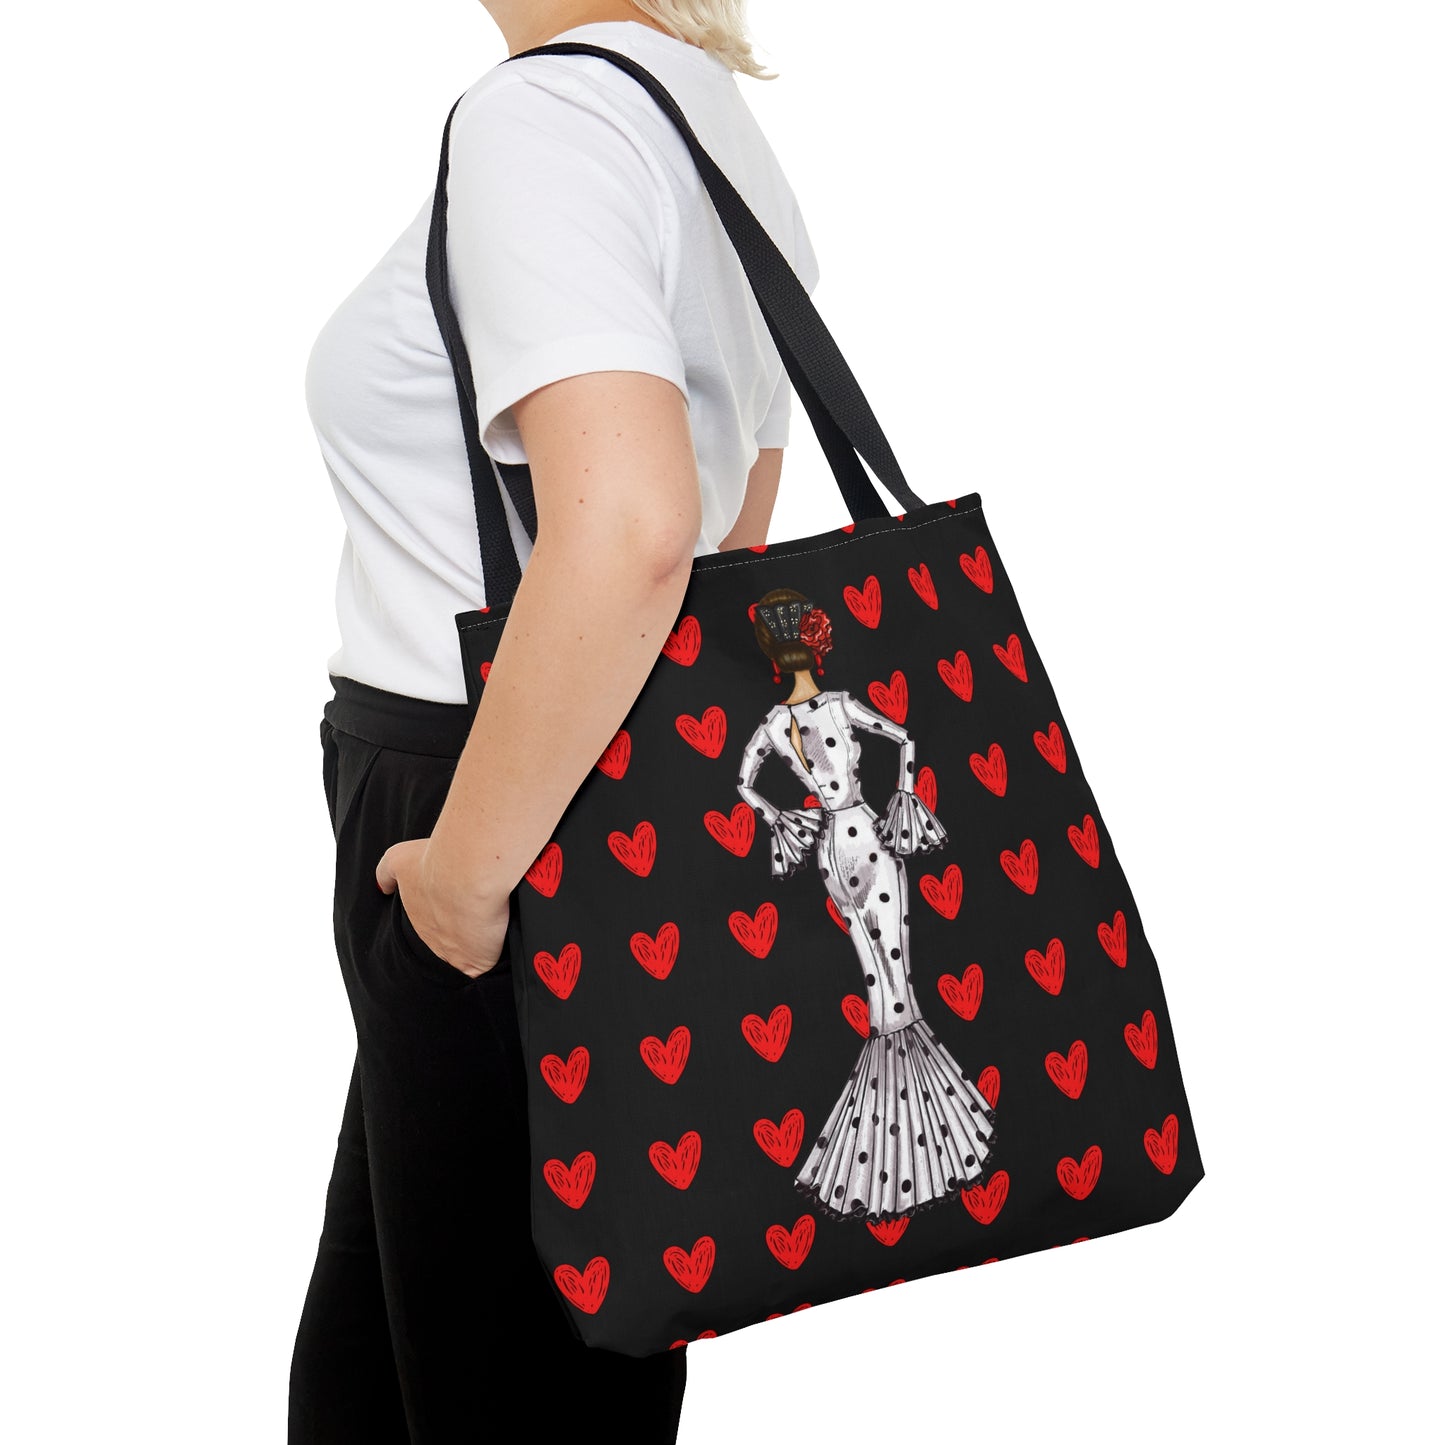 a woman carrying a black and red bag with hearts on it